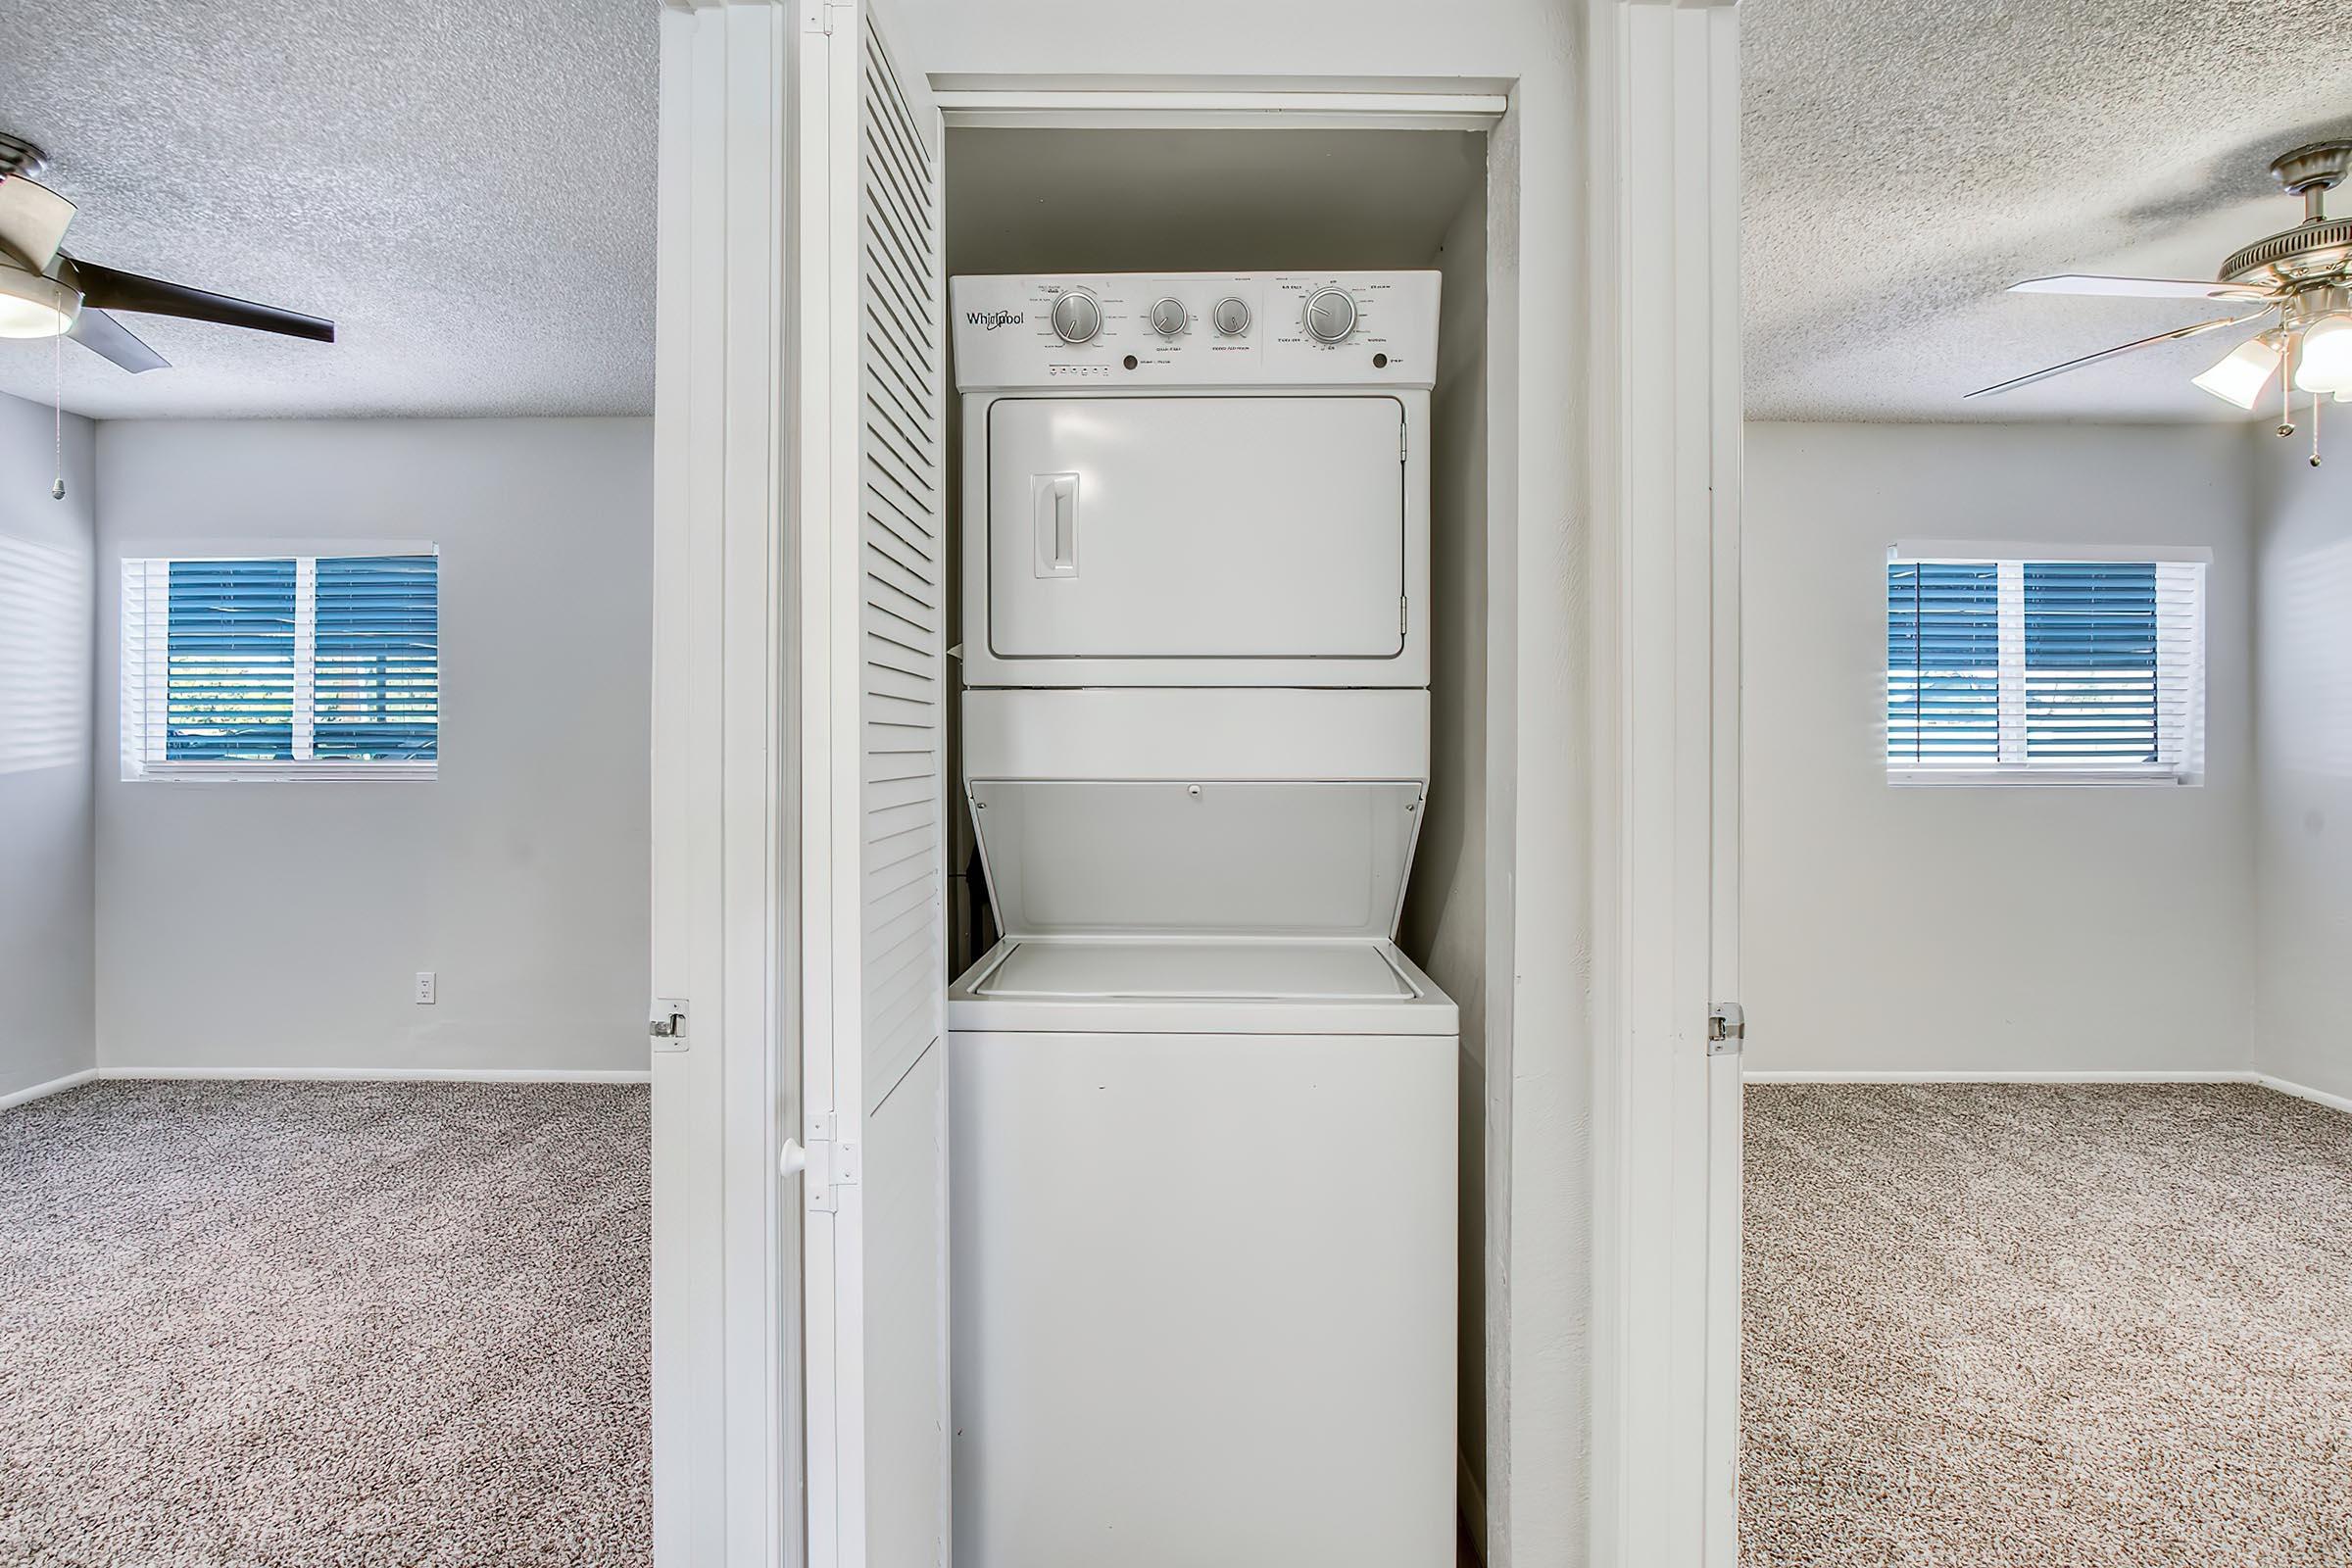 a refrigerator freezer sitting in a room